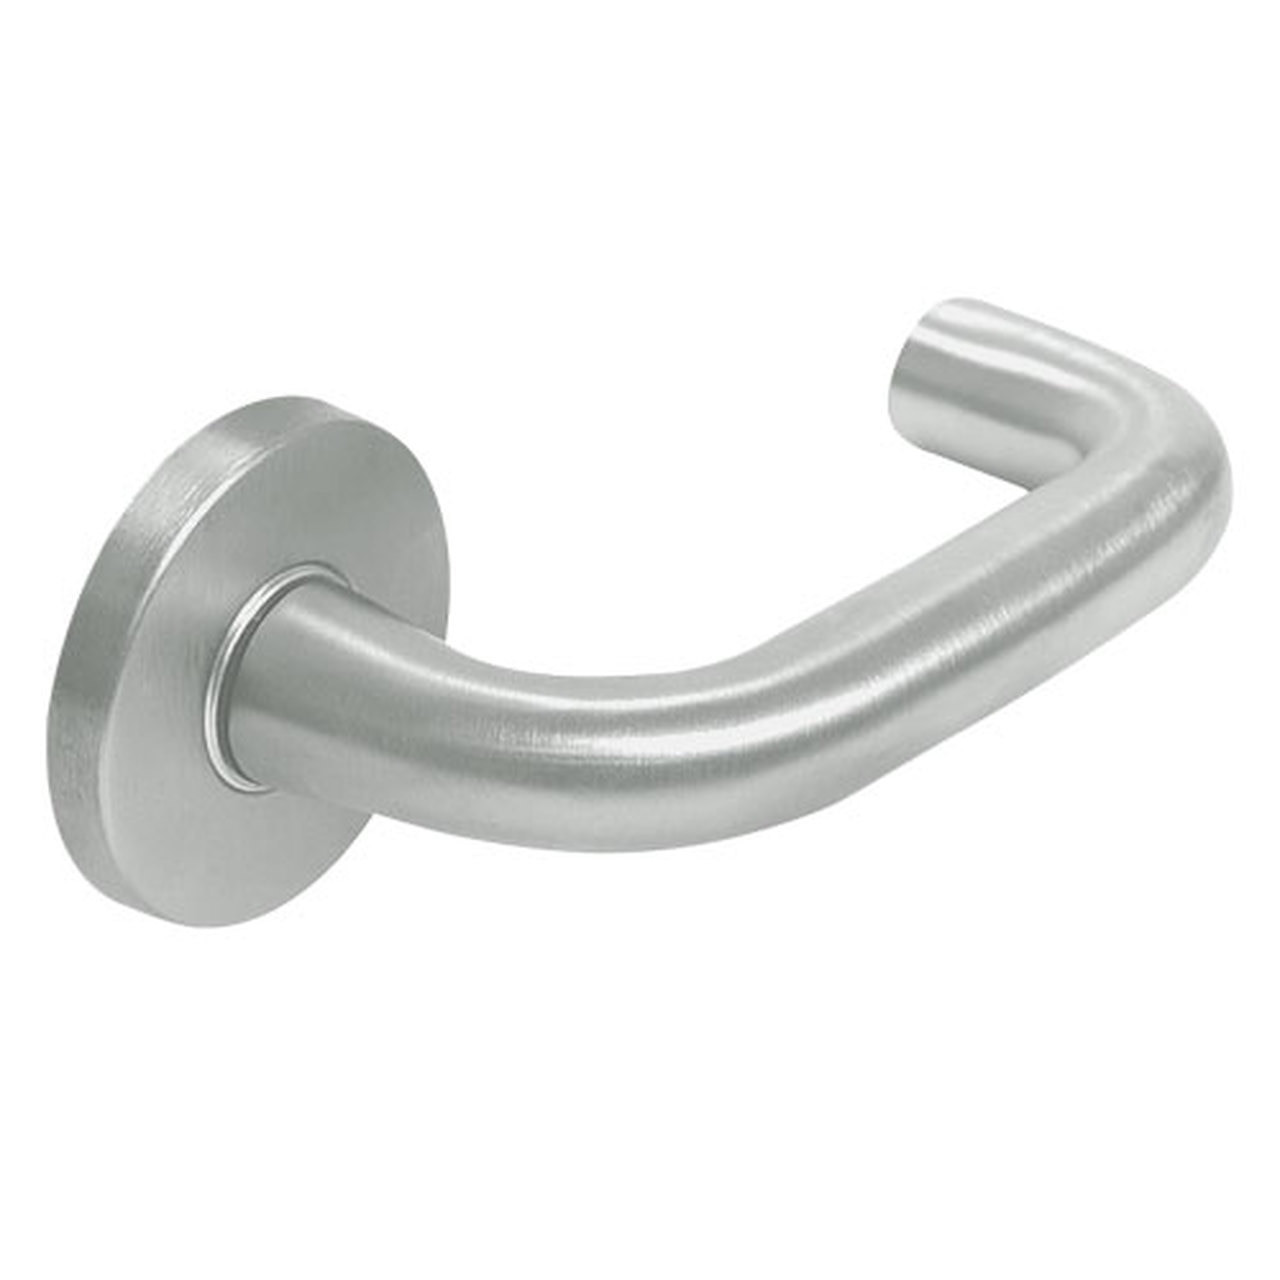 ML2032-LSF-619-M31 Corbin Russwin ML2000 Series Mortise Institution Trim Pack with Lustra Lever in Satin Nickel